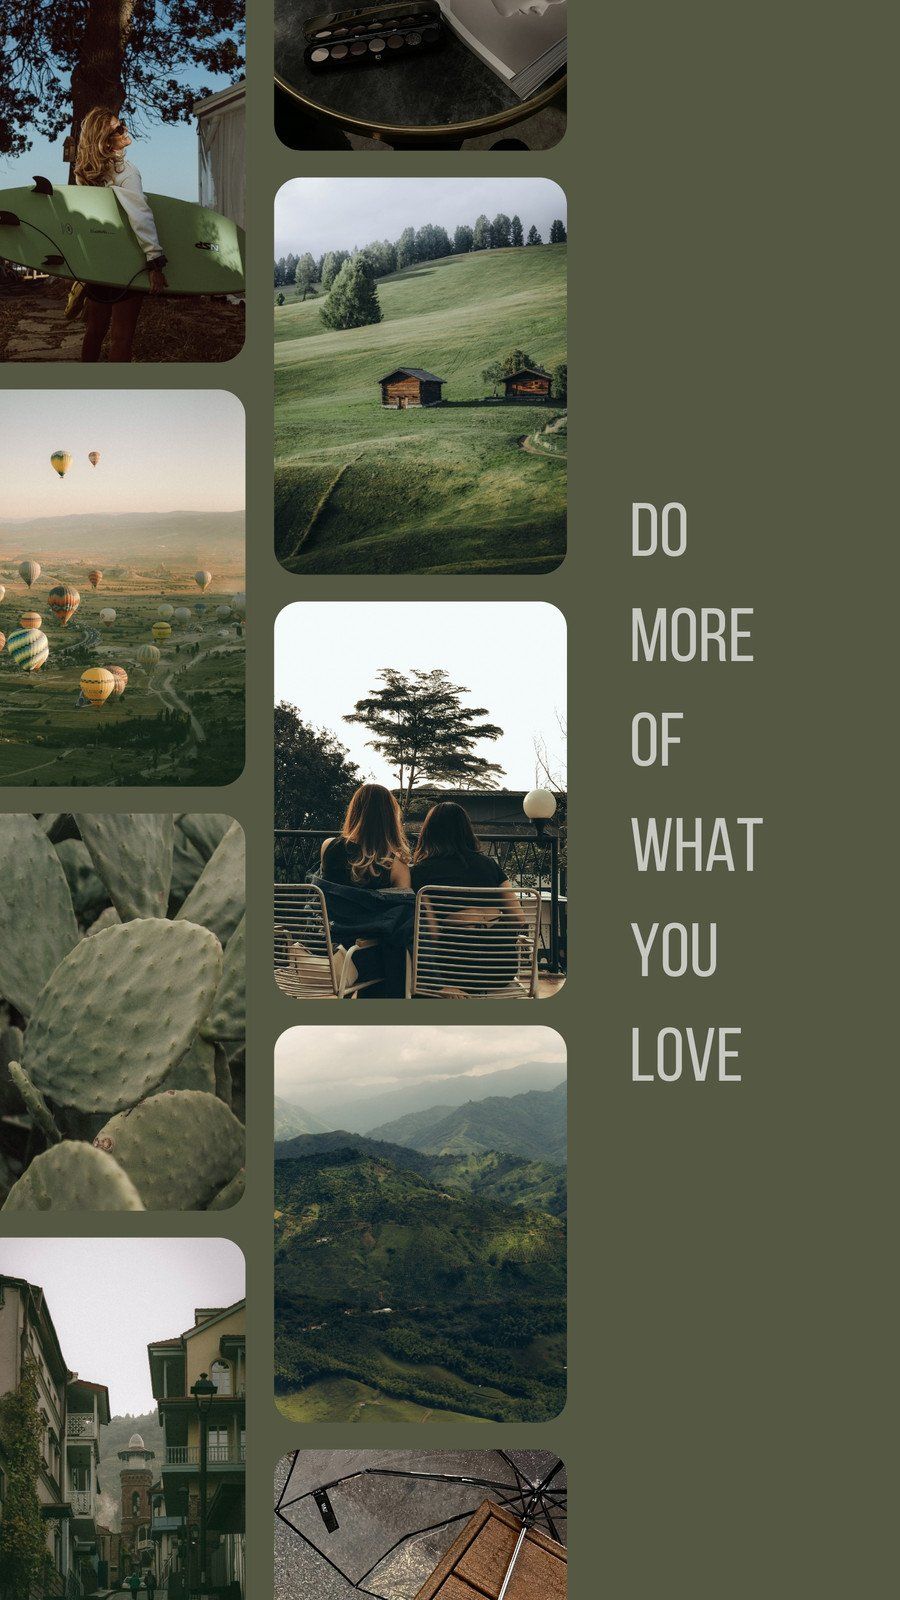 A collage of photos including a woman sitting on a bench, a landscape of a green field, and a cactus. - Dark green